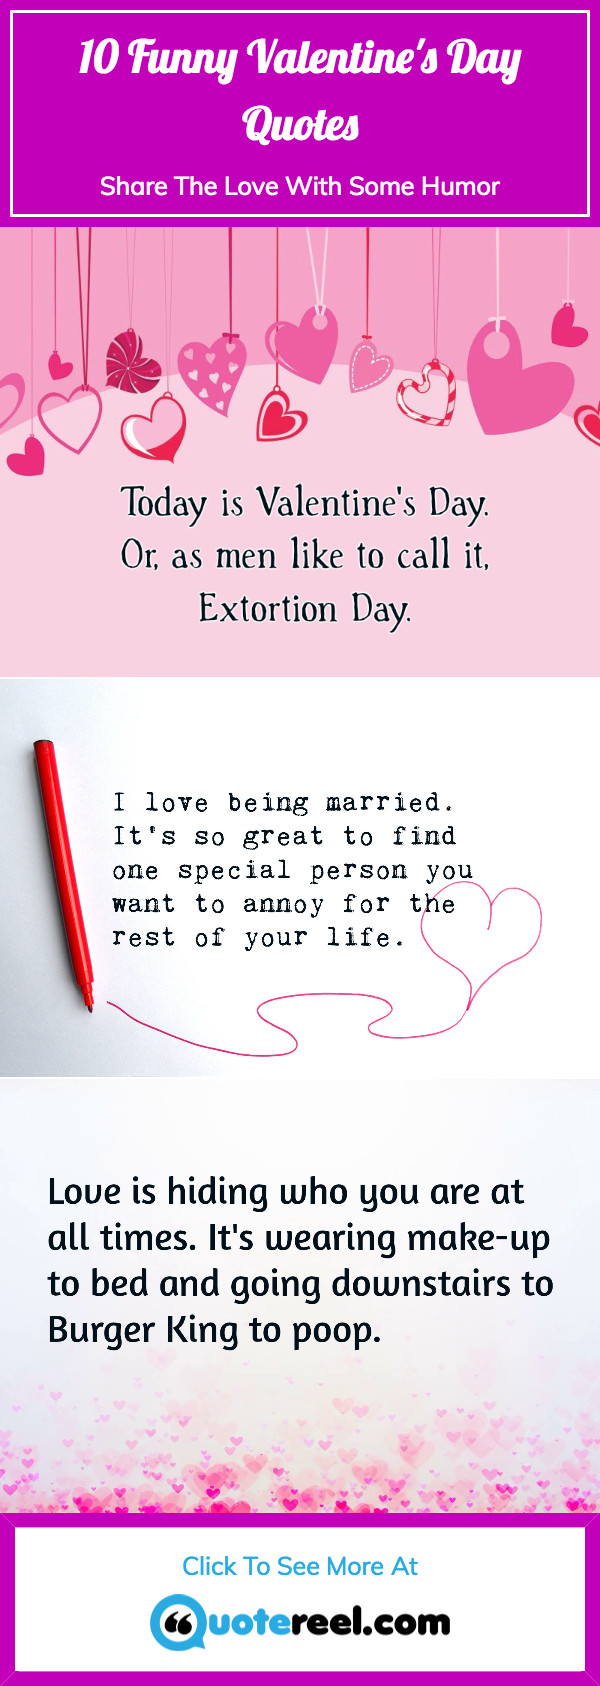 Valentines Day Quotes For Her
 Funny Valentine s Quotes That Add A Bit Humor To The